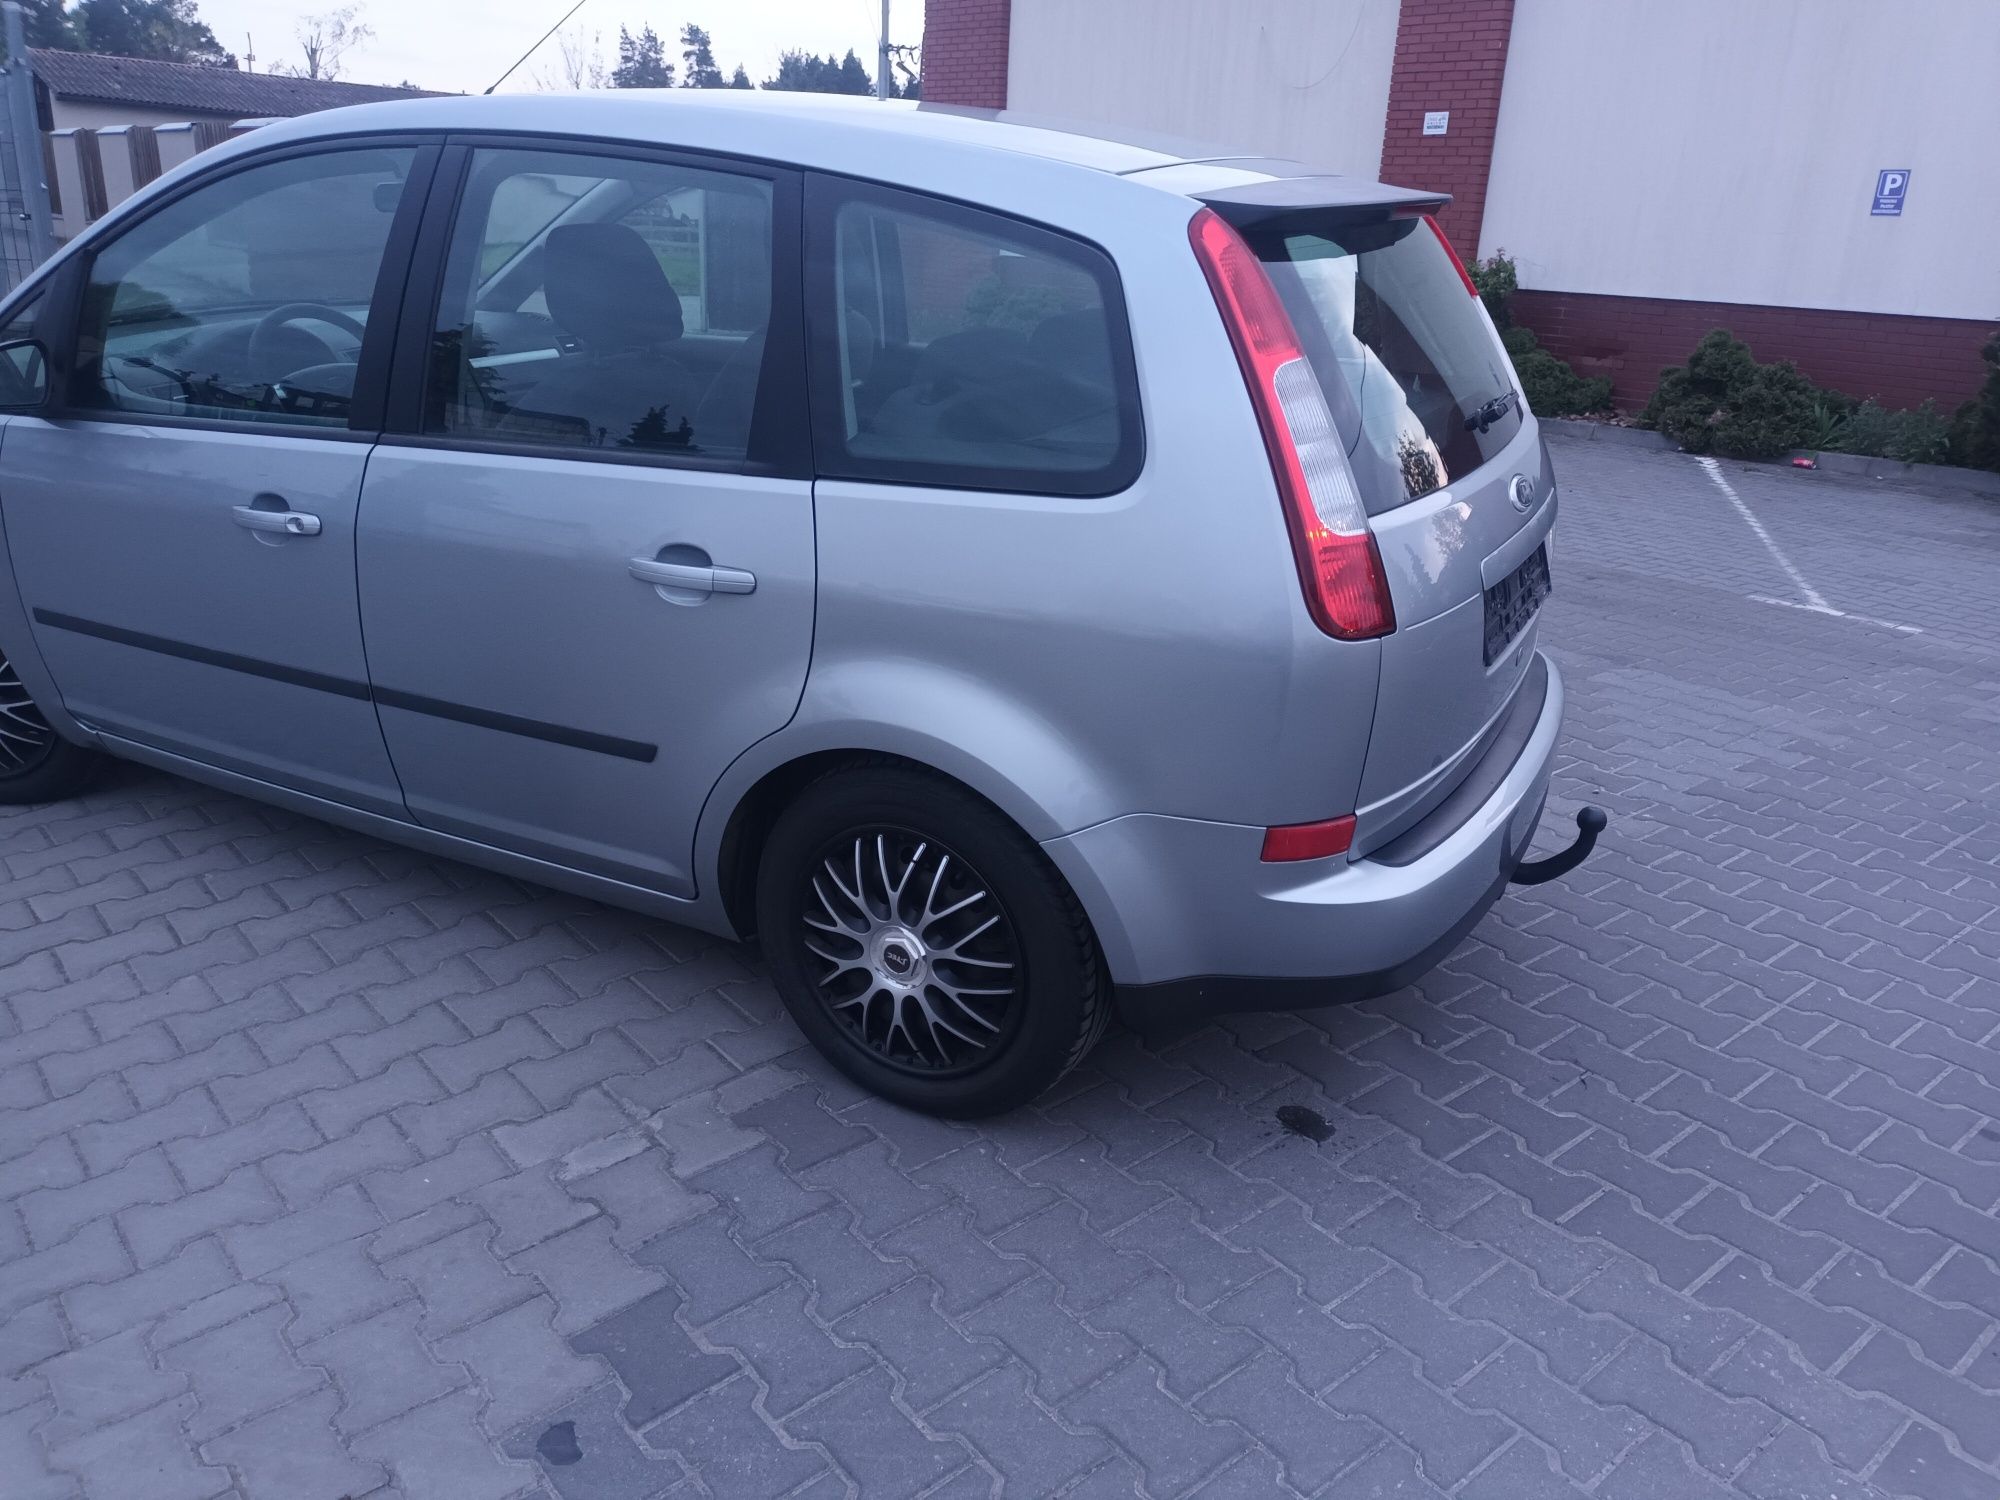 Ford focus C-max 1.8 benzyna